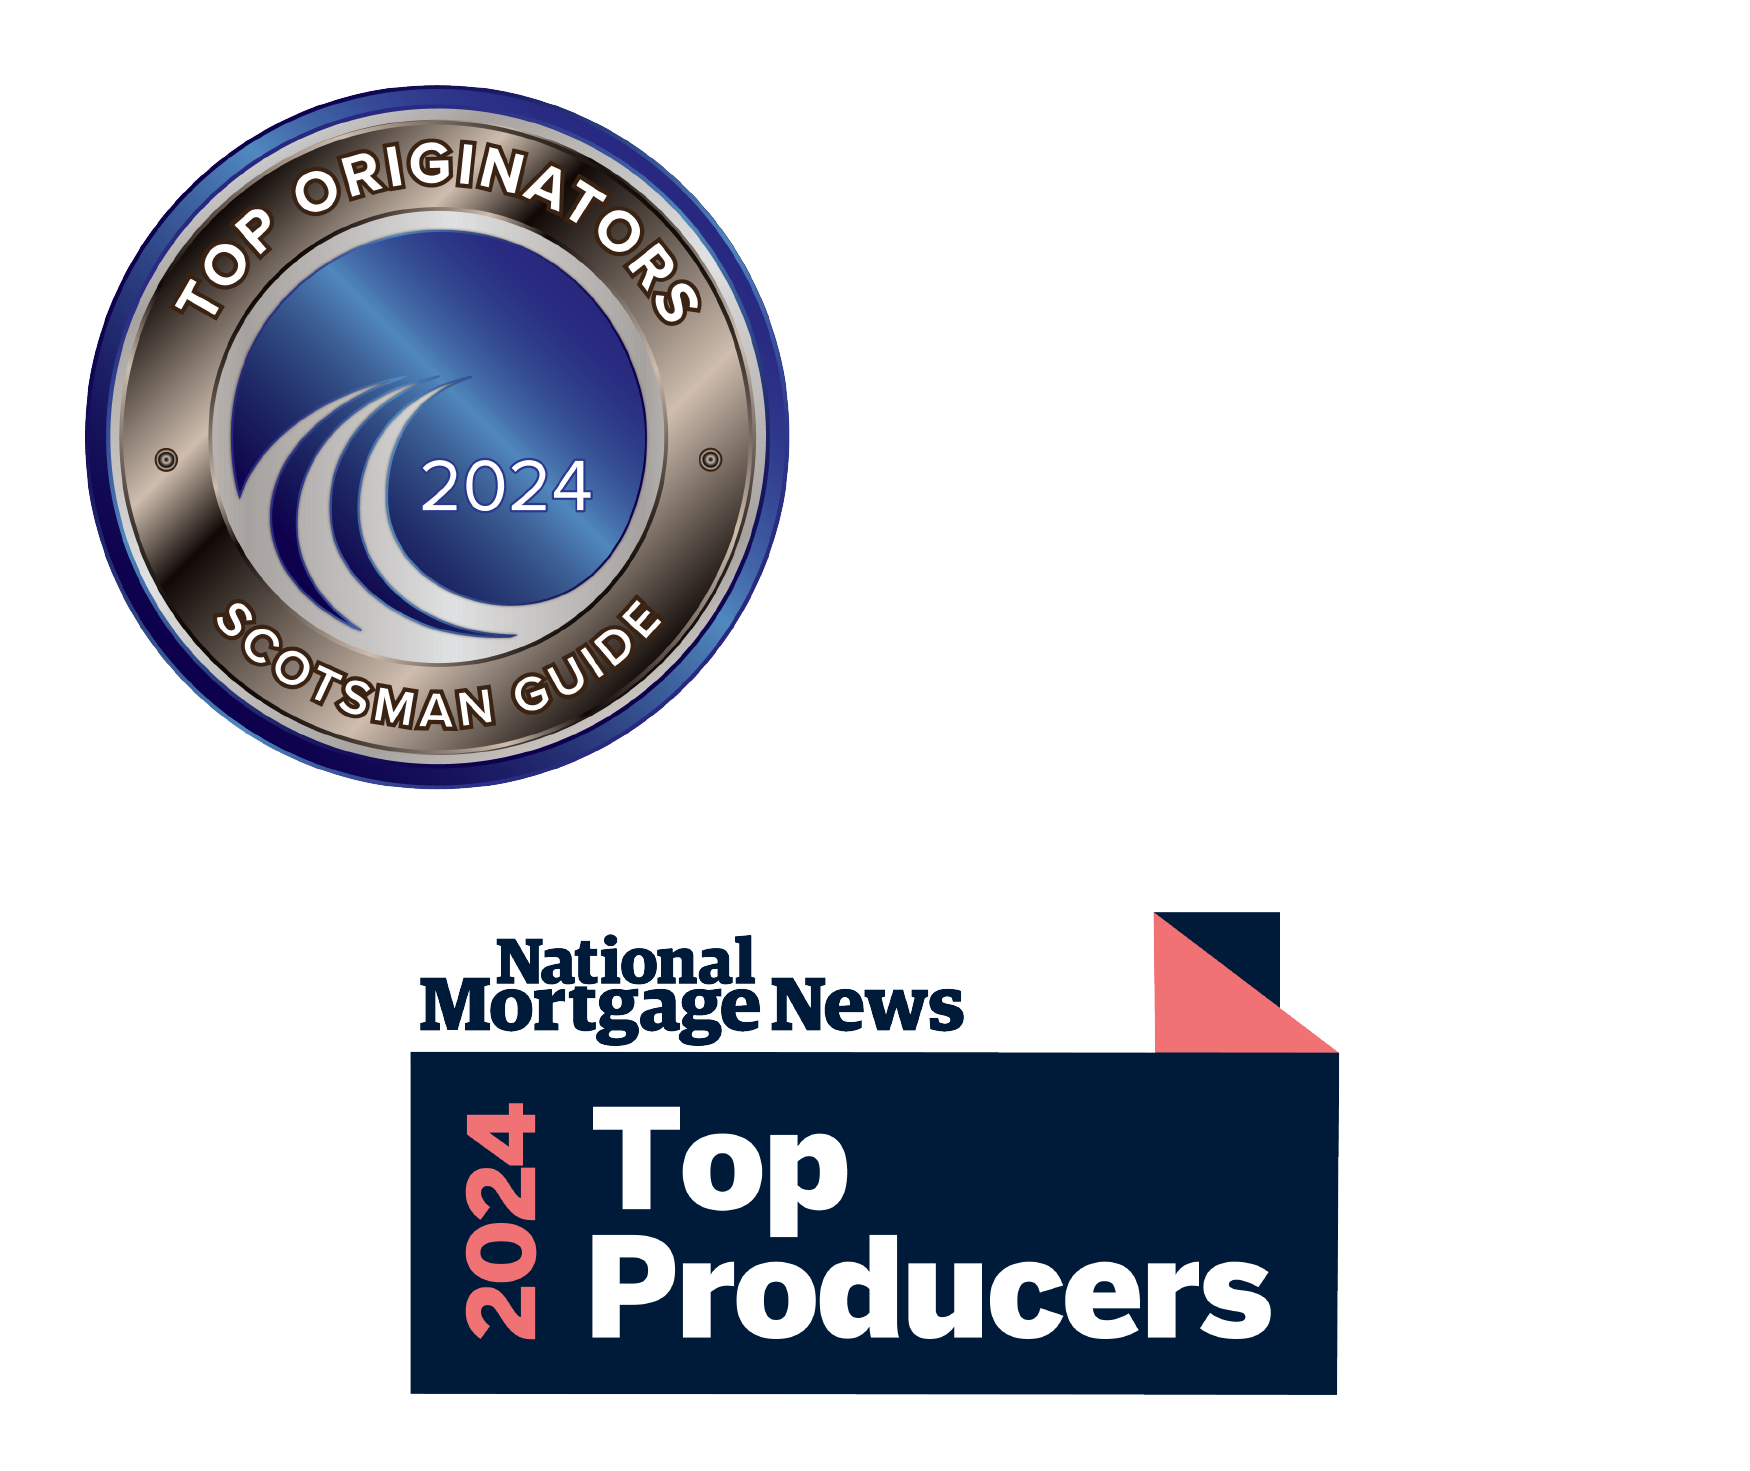 Top Originators 2024, Equal Housing Opportunity and 2024 Top Producers Logo